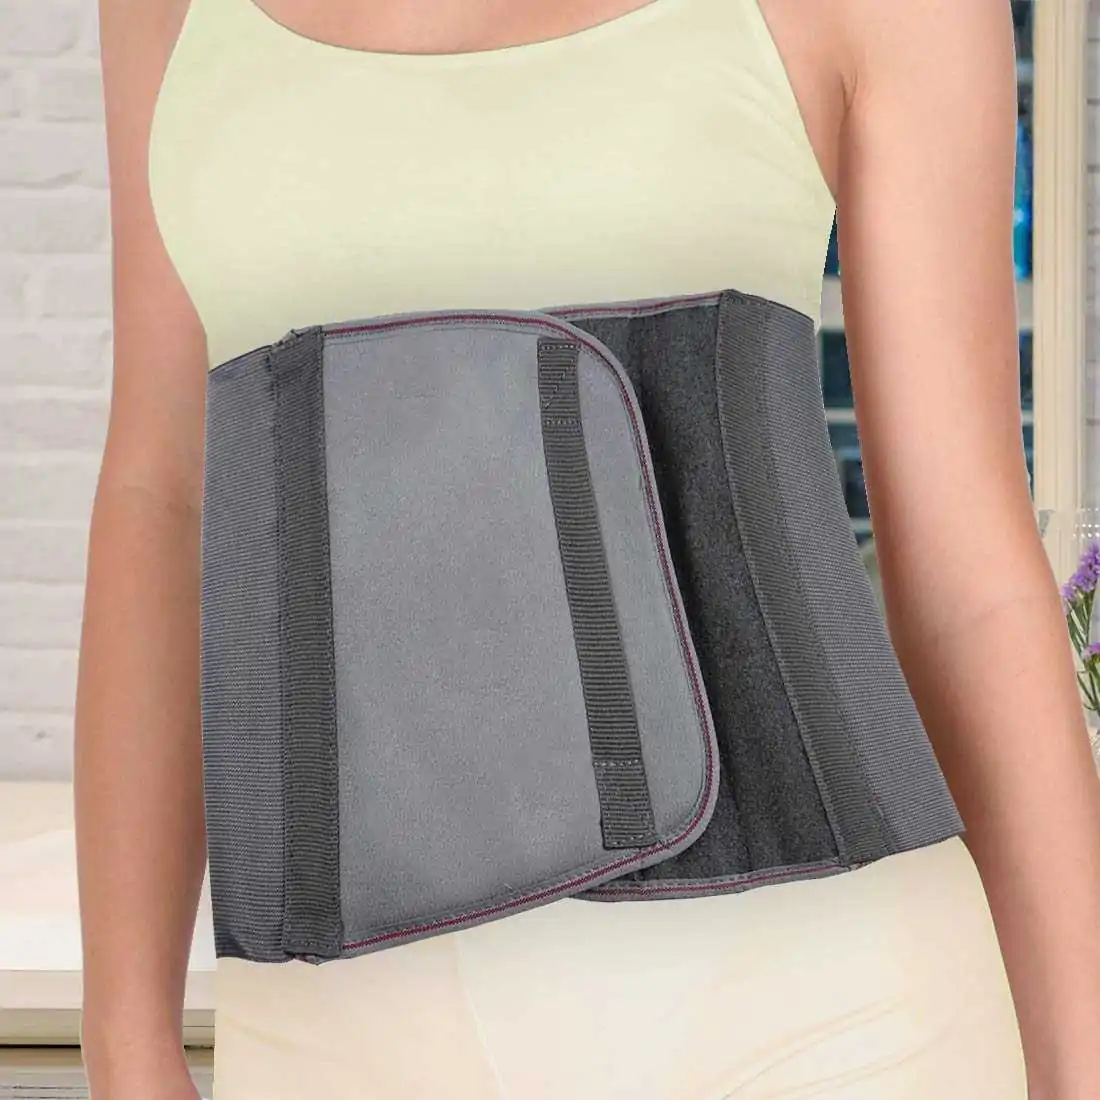 Mylo Post Pregnancy Support & Recovery Belt for Compression Support - Grey (L)